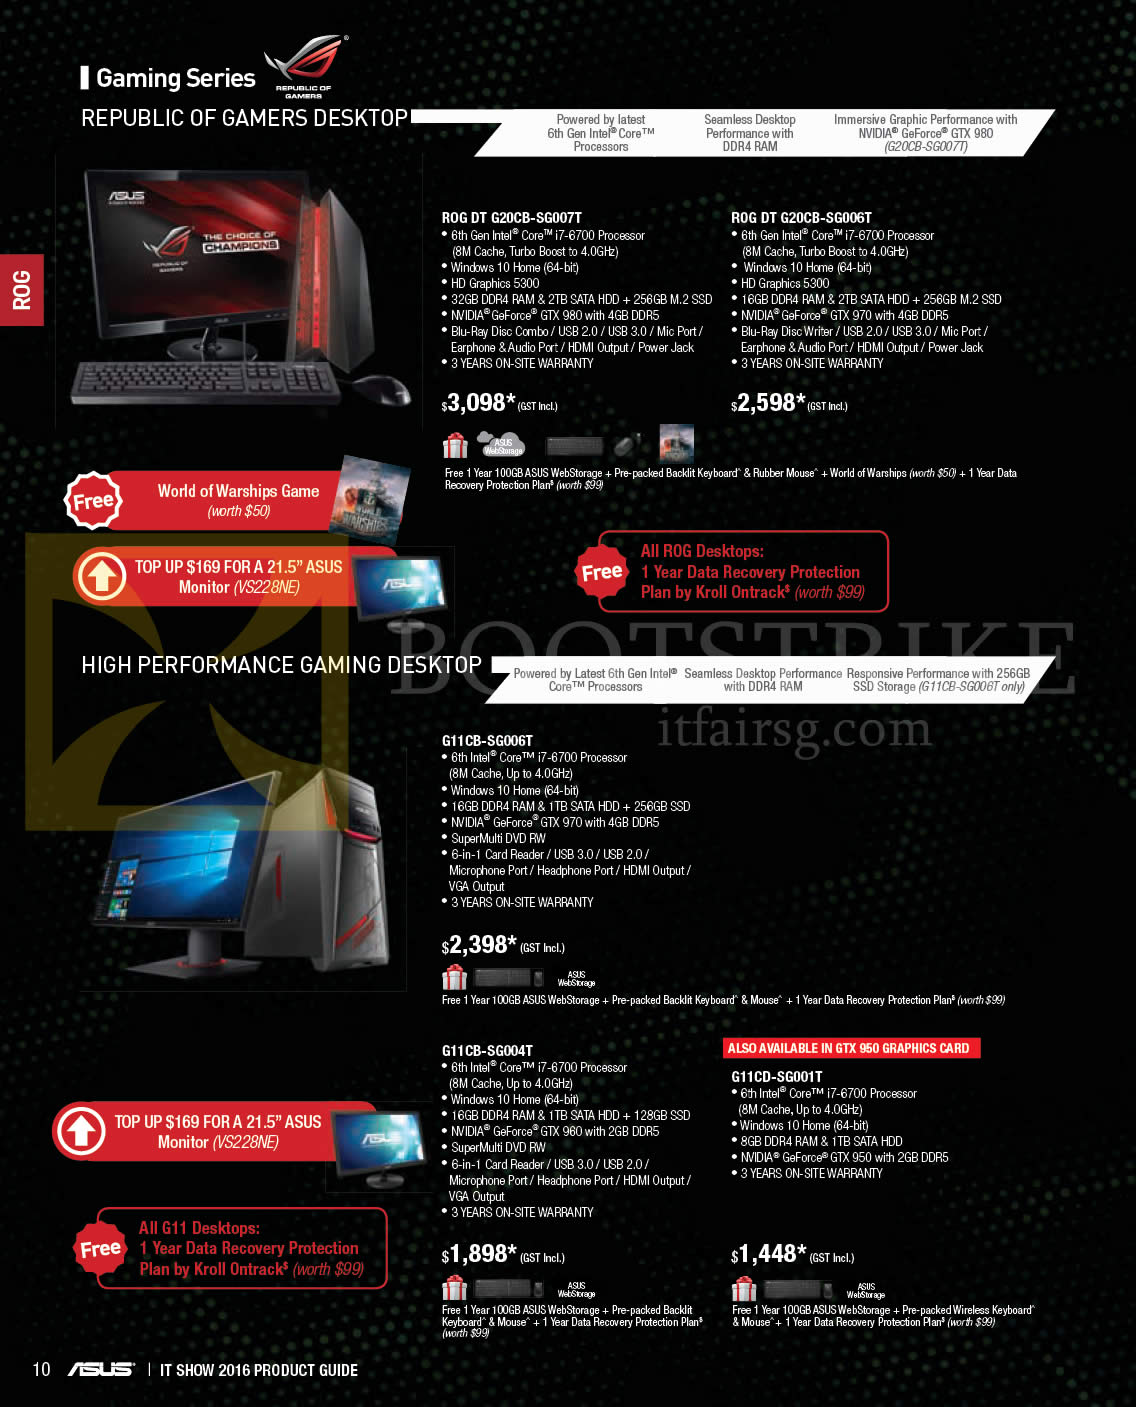 IT SHOW 2016 price list image brochure of ASUS Desktop PCs ROG DT G20CB-SG007T, G20CB-SG006T, G11CB-SG006T, G11CB-SG004T, G11CD-SG001T